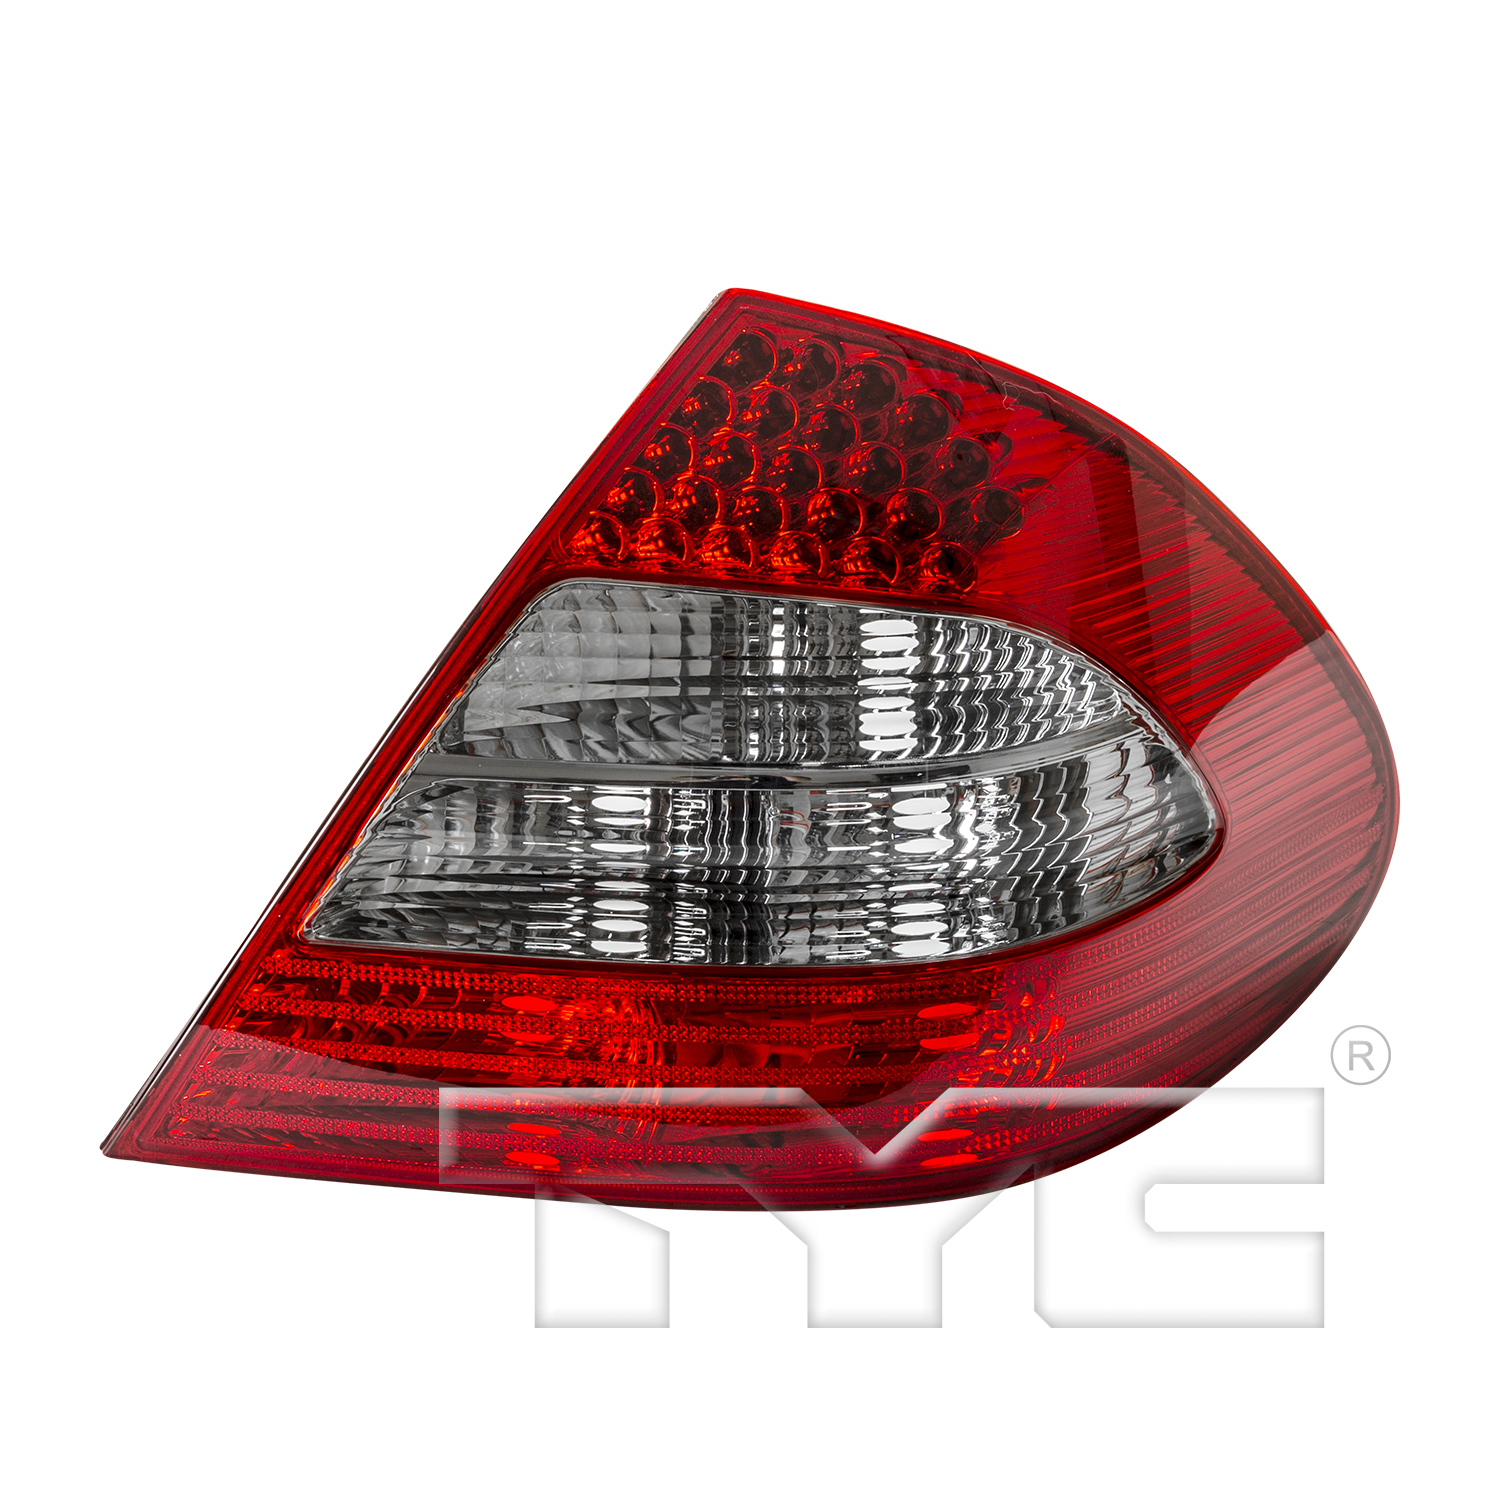 Aftermarket TAILLIGHTS for MERCEDES-BENZ - E320, E320,07-09,RT Taillamp assy